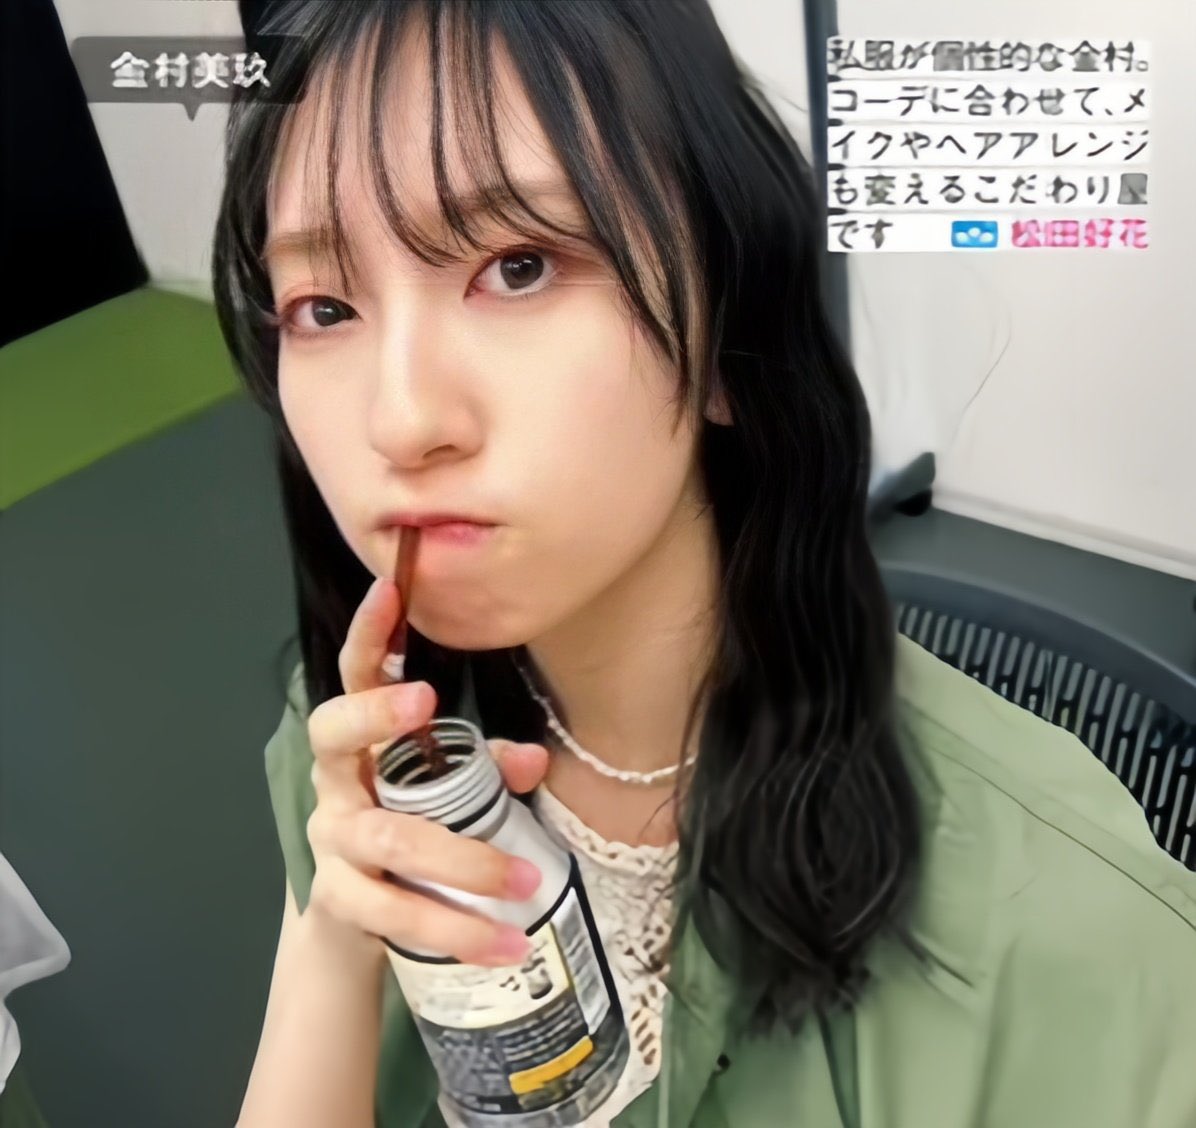 'Kanemura with her peculiar style.
In order to coordinate her fashion, she pickily changes her makeup, hair arrangements and such'
-Matsuda Konoka 🐙

(Coffee so strong, looks like it made Miku grumpy 🤨☕)

#日向撮
#金村美玖